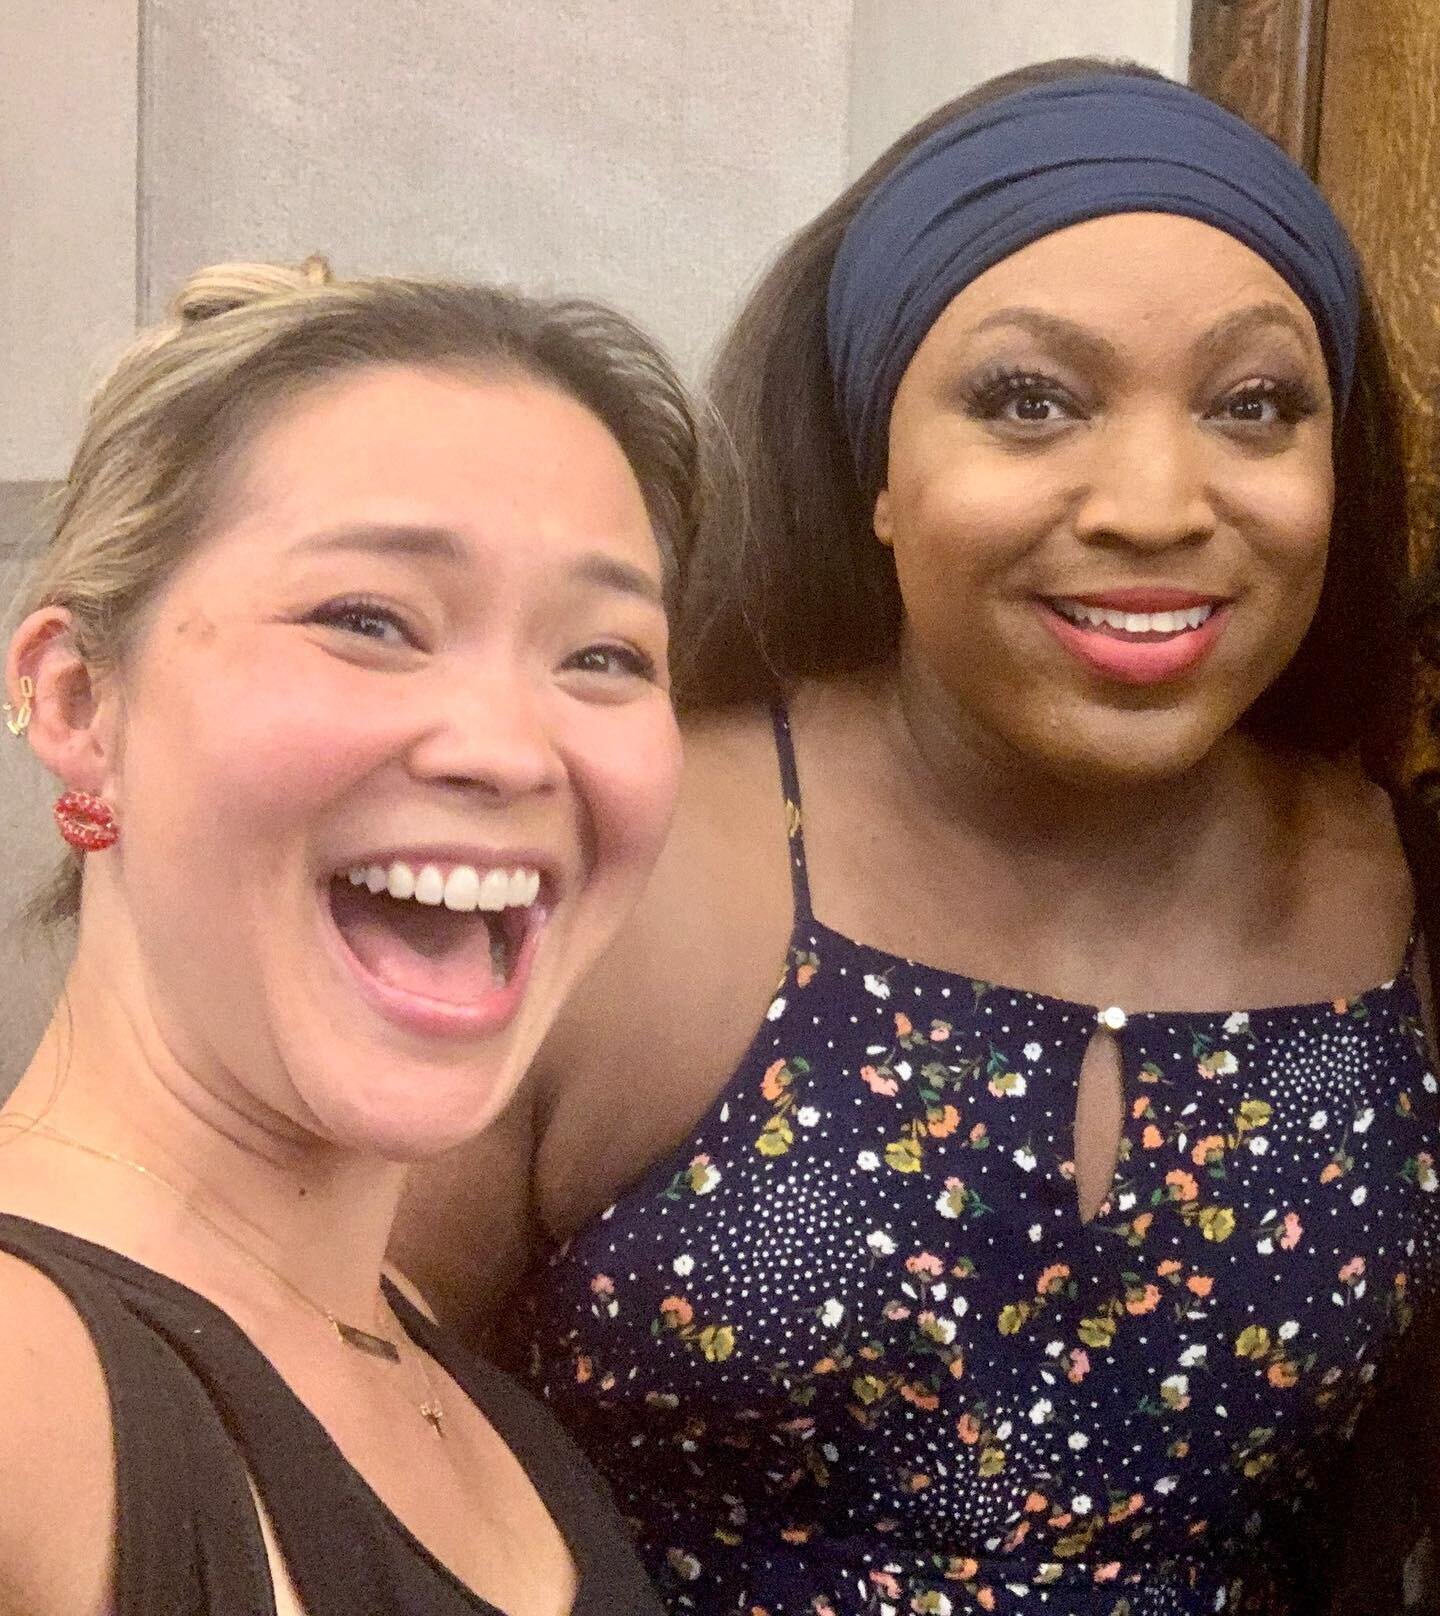 They can&rsquo;t steal all our joy, y&rsquo;all.

The JOY of seeing friends in their TONY-NOMINATED roles and the way they inspire others 😭💛🙏✊

So grateful for this added #pride performance and the beautiful success of this show and @lmorganlee an